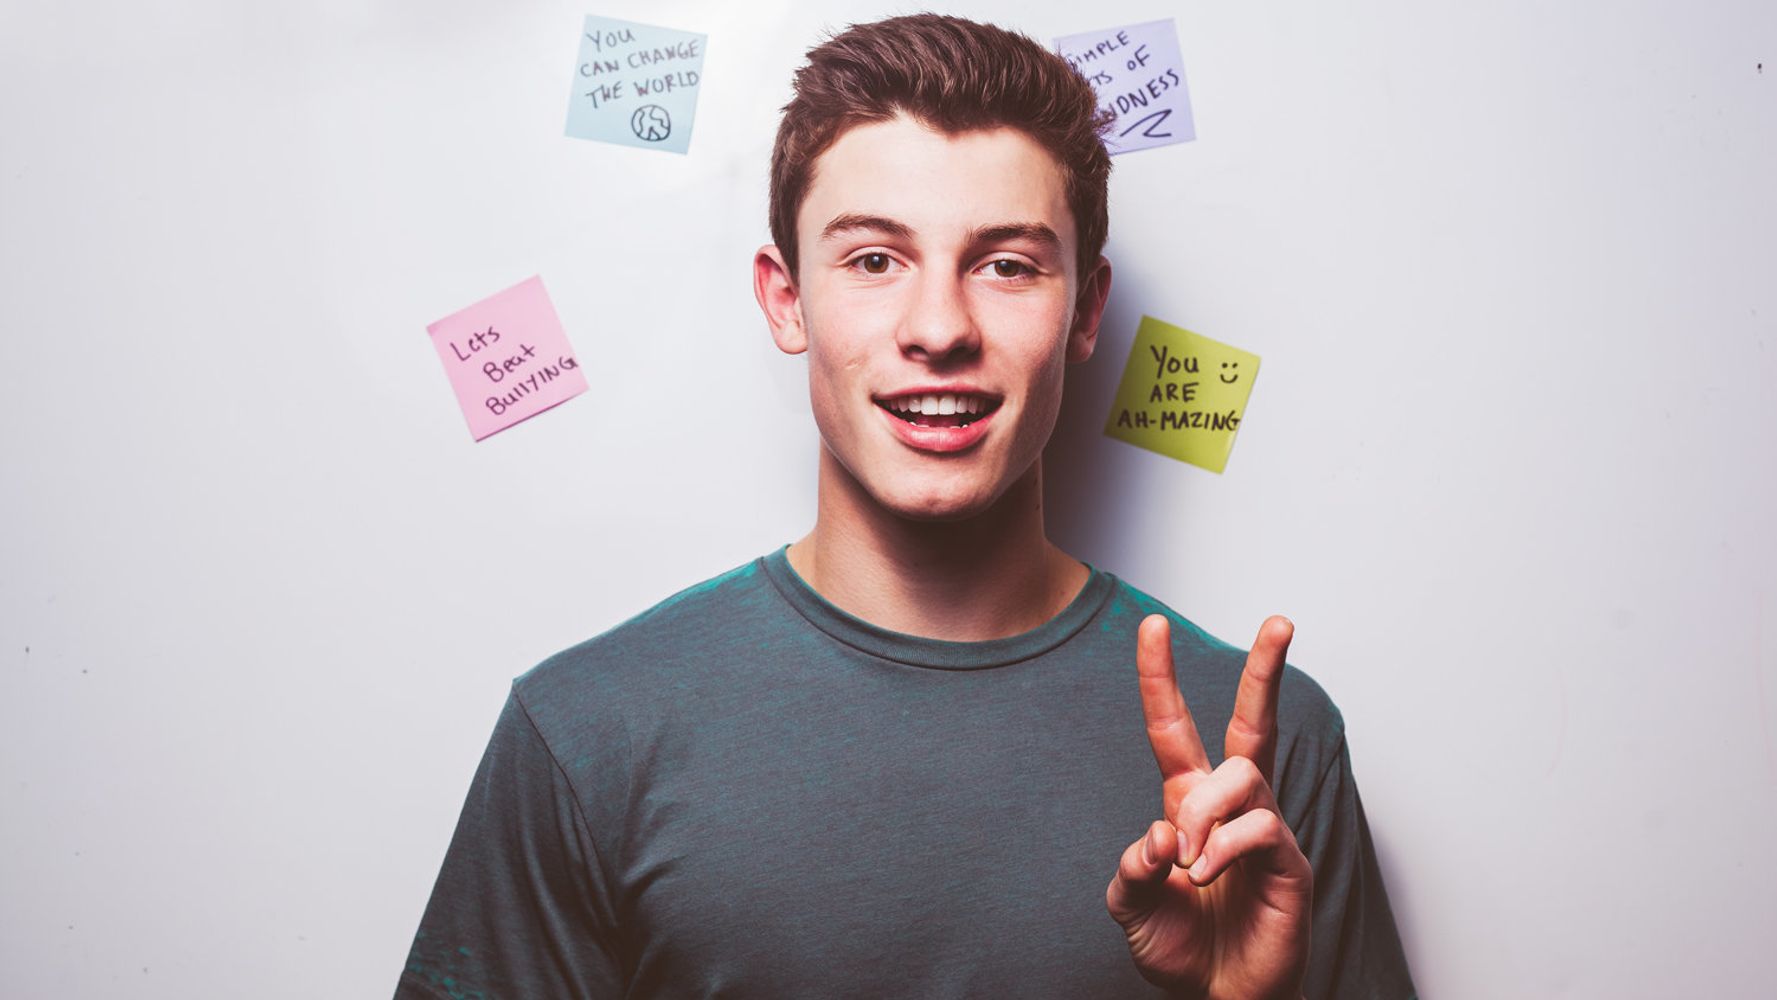 Shawn Mendes Aims To Reduce Self-Harm With #NotesFromShawn